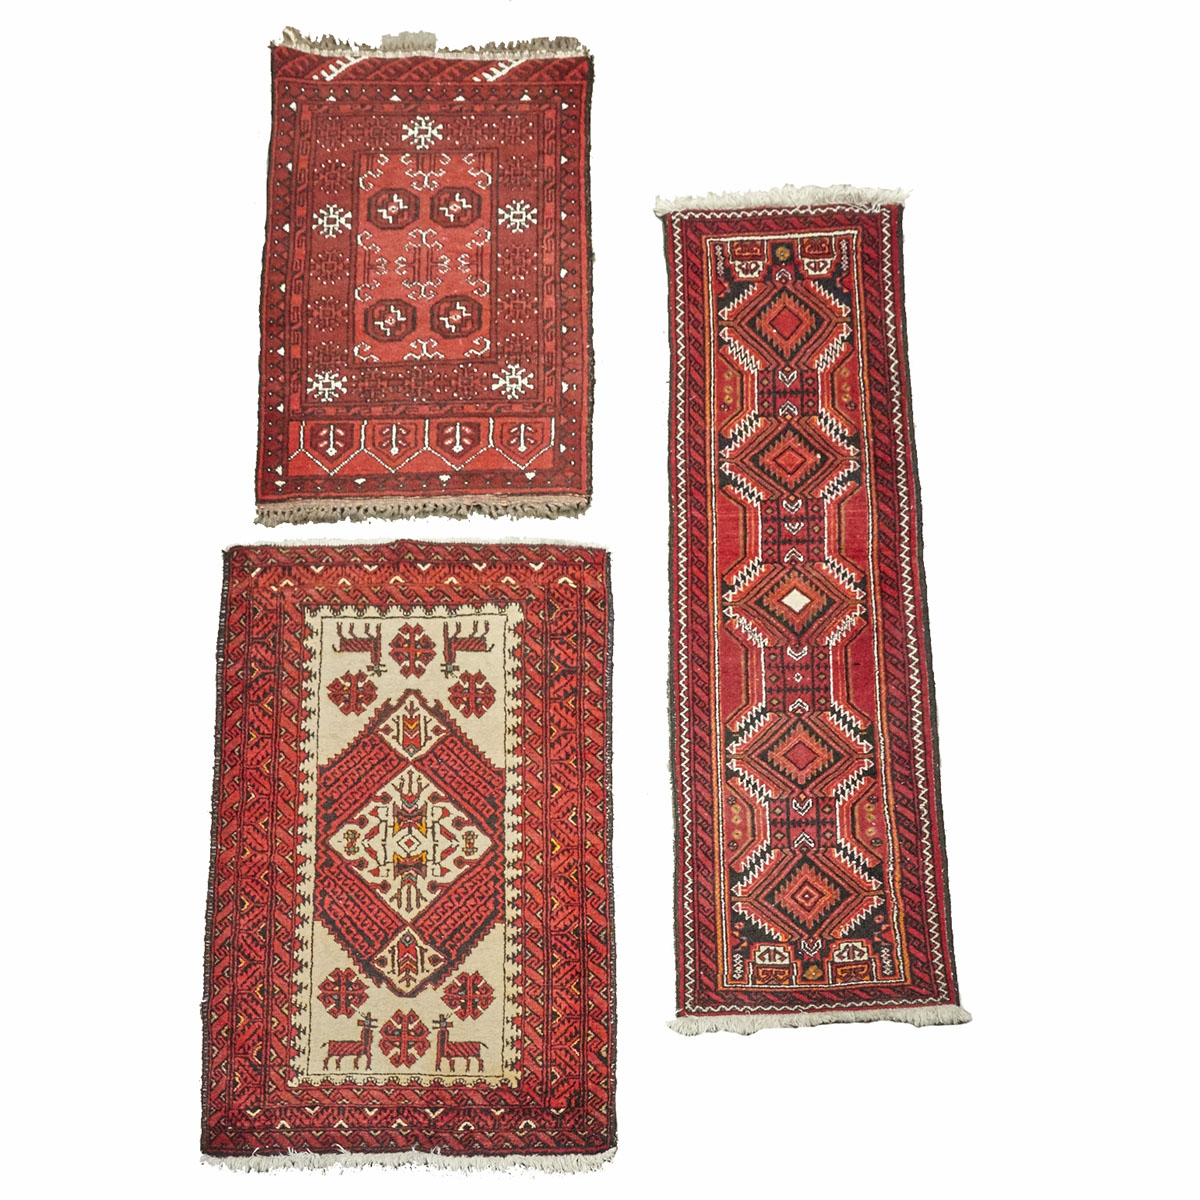 Baluchi Ruuner together with two small Baluchi mats, middle 20th century, Persian